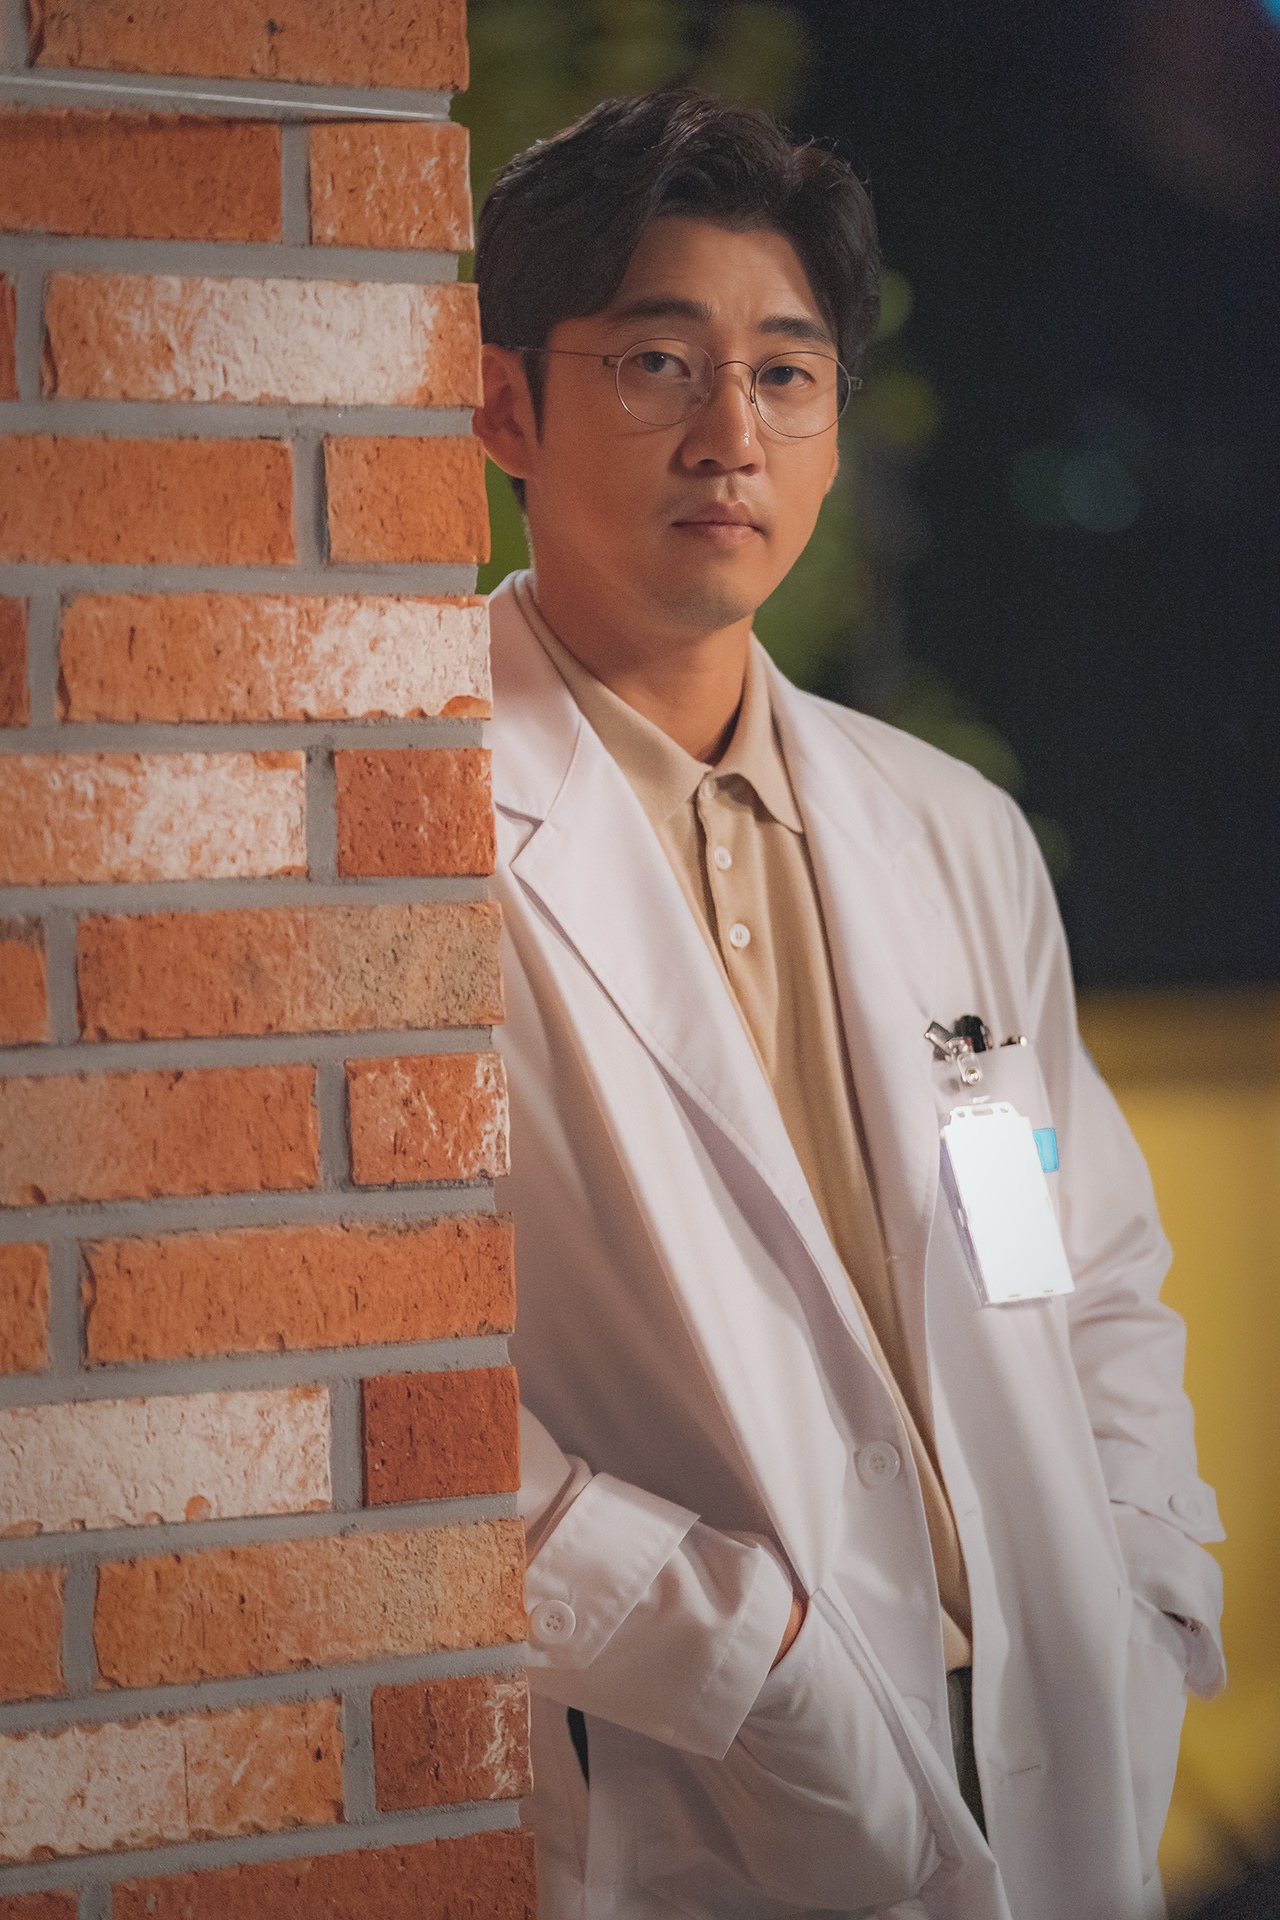 The relationship between Chocolate Yoon Kye-sang and Ha Ji-won is a crucial change.On the 21st, before the 8th episode of JTBCs Lamar Jackson Chocolate (director Lee Hyung-min, playwright Lee Kyung-hee, production Lamar JacksonHouse and JYP Pictures), he caught up with the image of Lee Kang (Yoon Kye-sang), who ran to the Danger, ...While Lee Kang is aware of his attraction to Moon Cha-young, the distance between the two people, which is closer, causes excitement and adds anticipation to romance.In the last broadcast, Lee Kang realized his mind toward Moon Cha-young and predicted a change. Lee Kang tried to ignore him, but found himself caring about Moon Cha-young.I want to avoid it, but I keep worrying and worrying about people, he asked himself, and Lee Gang, who had been chewing on the short encounters with Moon Cha-young for a long time, said, Min Sung.I feel like Im lost again. Moon Cha-young was already in the heart of Lee Gang.Moon Cha-young meets Danger before such a river can awaken Feeling properly. In the public photos, Moon Cha-young, who was distressed in a rare mountain, is unconscious and collapsed.There is an unhinderable worry in the eyes of Lee River, who has run a dark mountain road to find Moon Cha-young.Moon Cha-youngs face, which looks like a miracle, also sees a complex number of Feelings. Lee Gang, who walks along the mountain road with Moon Cha-young without hesitation, and Moon Cha-young, who buried his head on his back.The deep eyes of Lee Gang, who silently watches Moon Cha-young, who shed tears, in the subsequent photos, stimulate his curiosity as he foresaw his change.In the 8th episode, which will be released today (21st), Lee Gang and Moon Cha-young, who have accumulated different Feelings in a mixed relationship, finally begin to meet.Whether Lee Kang can find the answer to the question he asked himself and be honest with his mind, the process of Lee Kang and Moon Cha Young going to each other is drawn in a delicate and delicate way.Changes begin to come to Moon Cha-young, who deepens his mind toward Lee Gang, and Lee Gang, who is aware of his mind.The two people who are slow, but have begun to seep deeper, and the changes that start to face with them will stimulate their excitement.Meanwhile, JTBCs Lamar Jackson Chocolate will air at 10:50 p.m. today (21st).iMBC Kim Hye-young  Photo DeLamar JacksonHouse, JYP Pictures